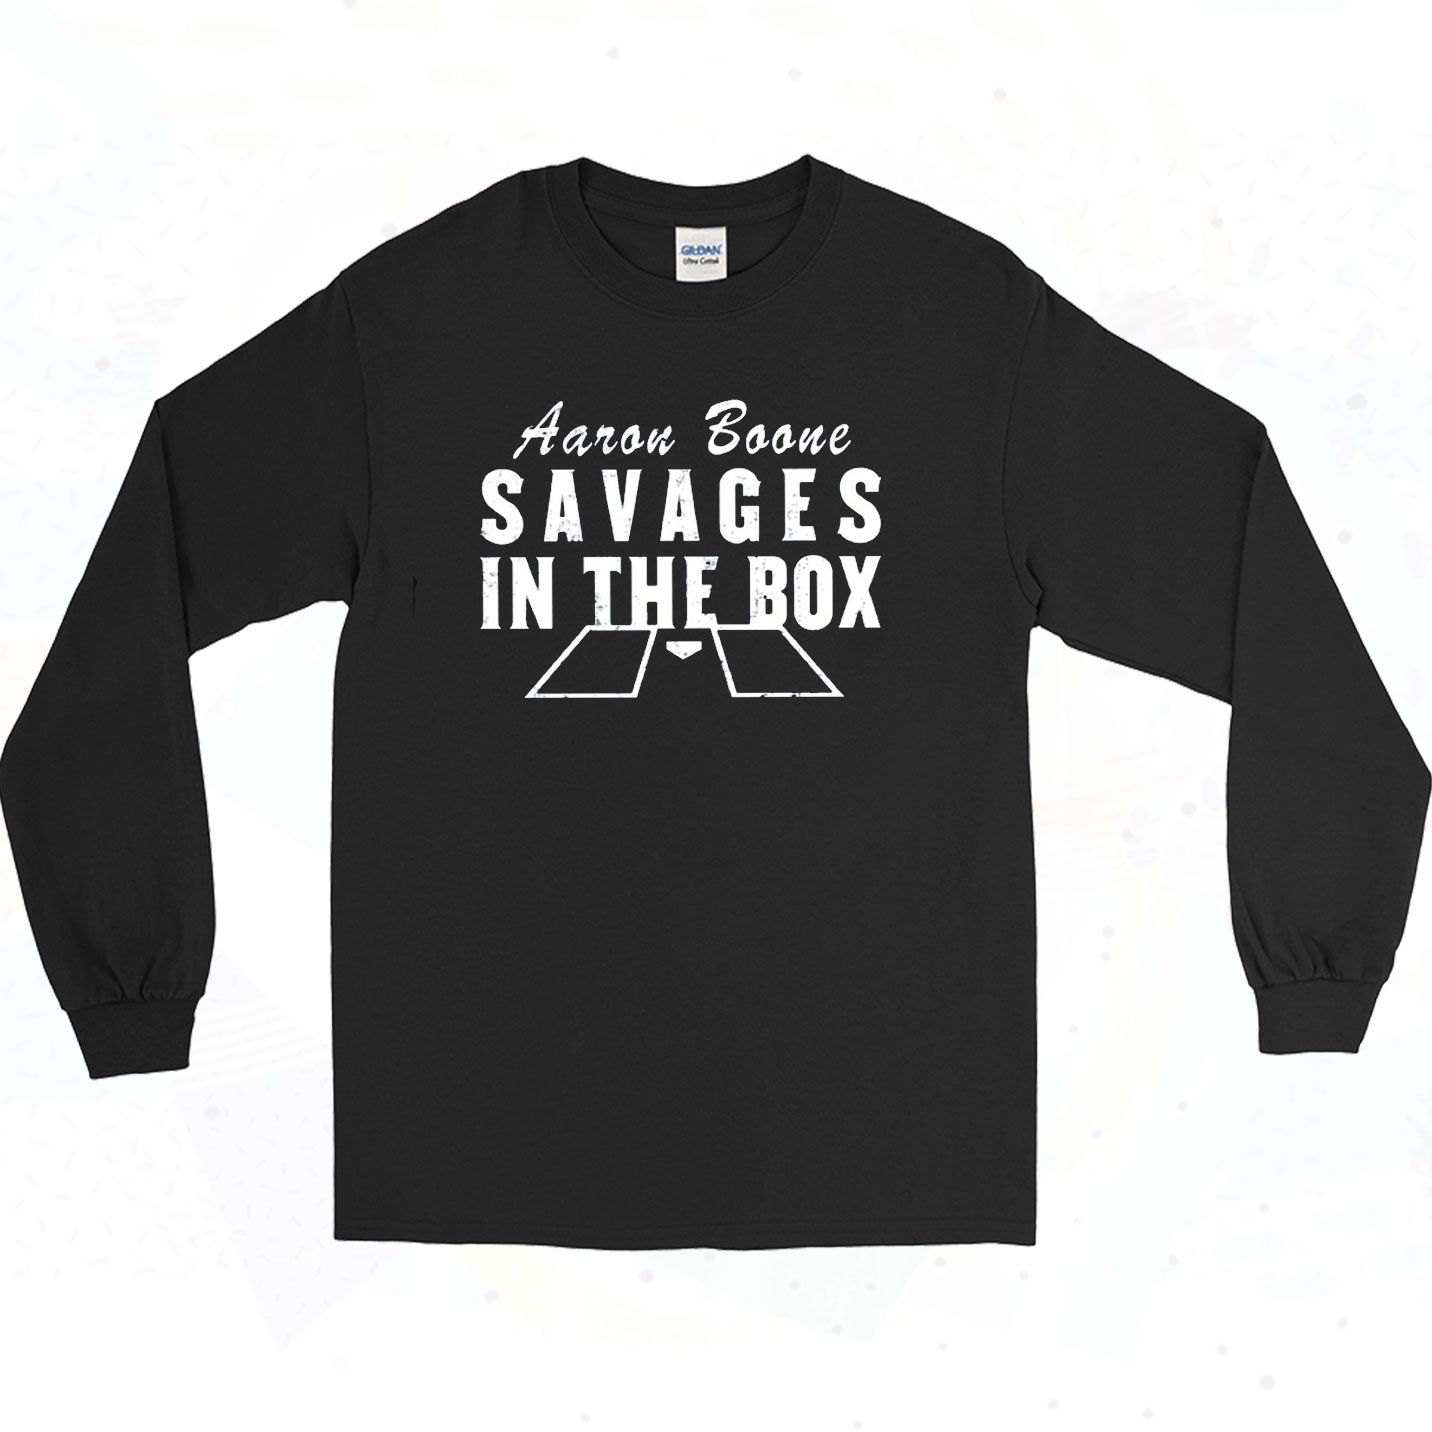 Aarone Boone Savages In The Box Long Sleeve Style - 90sclothes.com